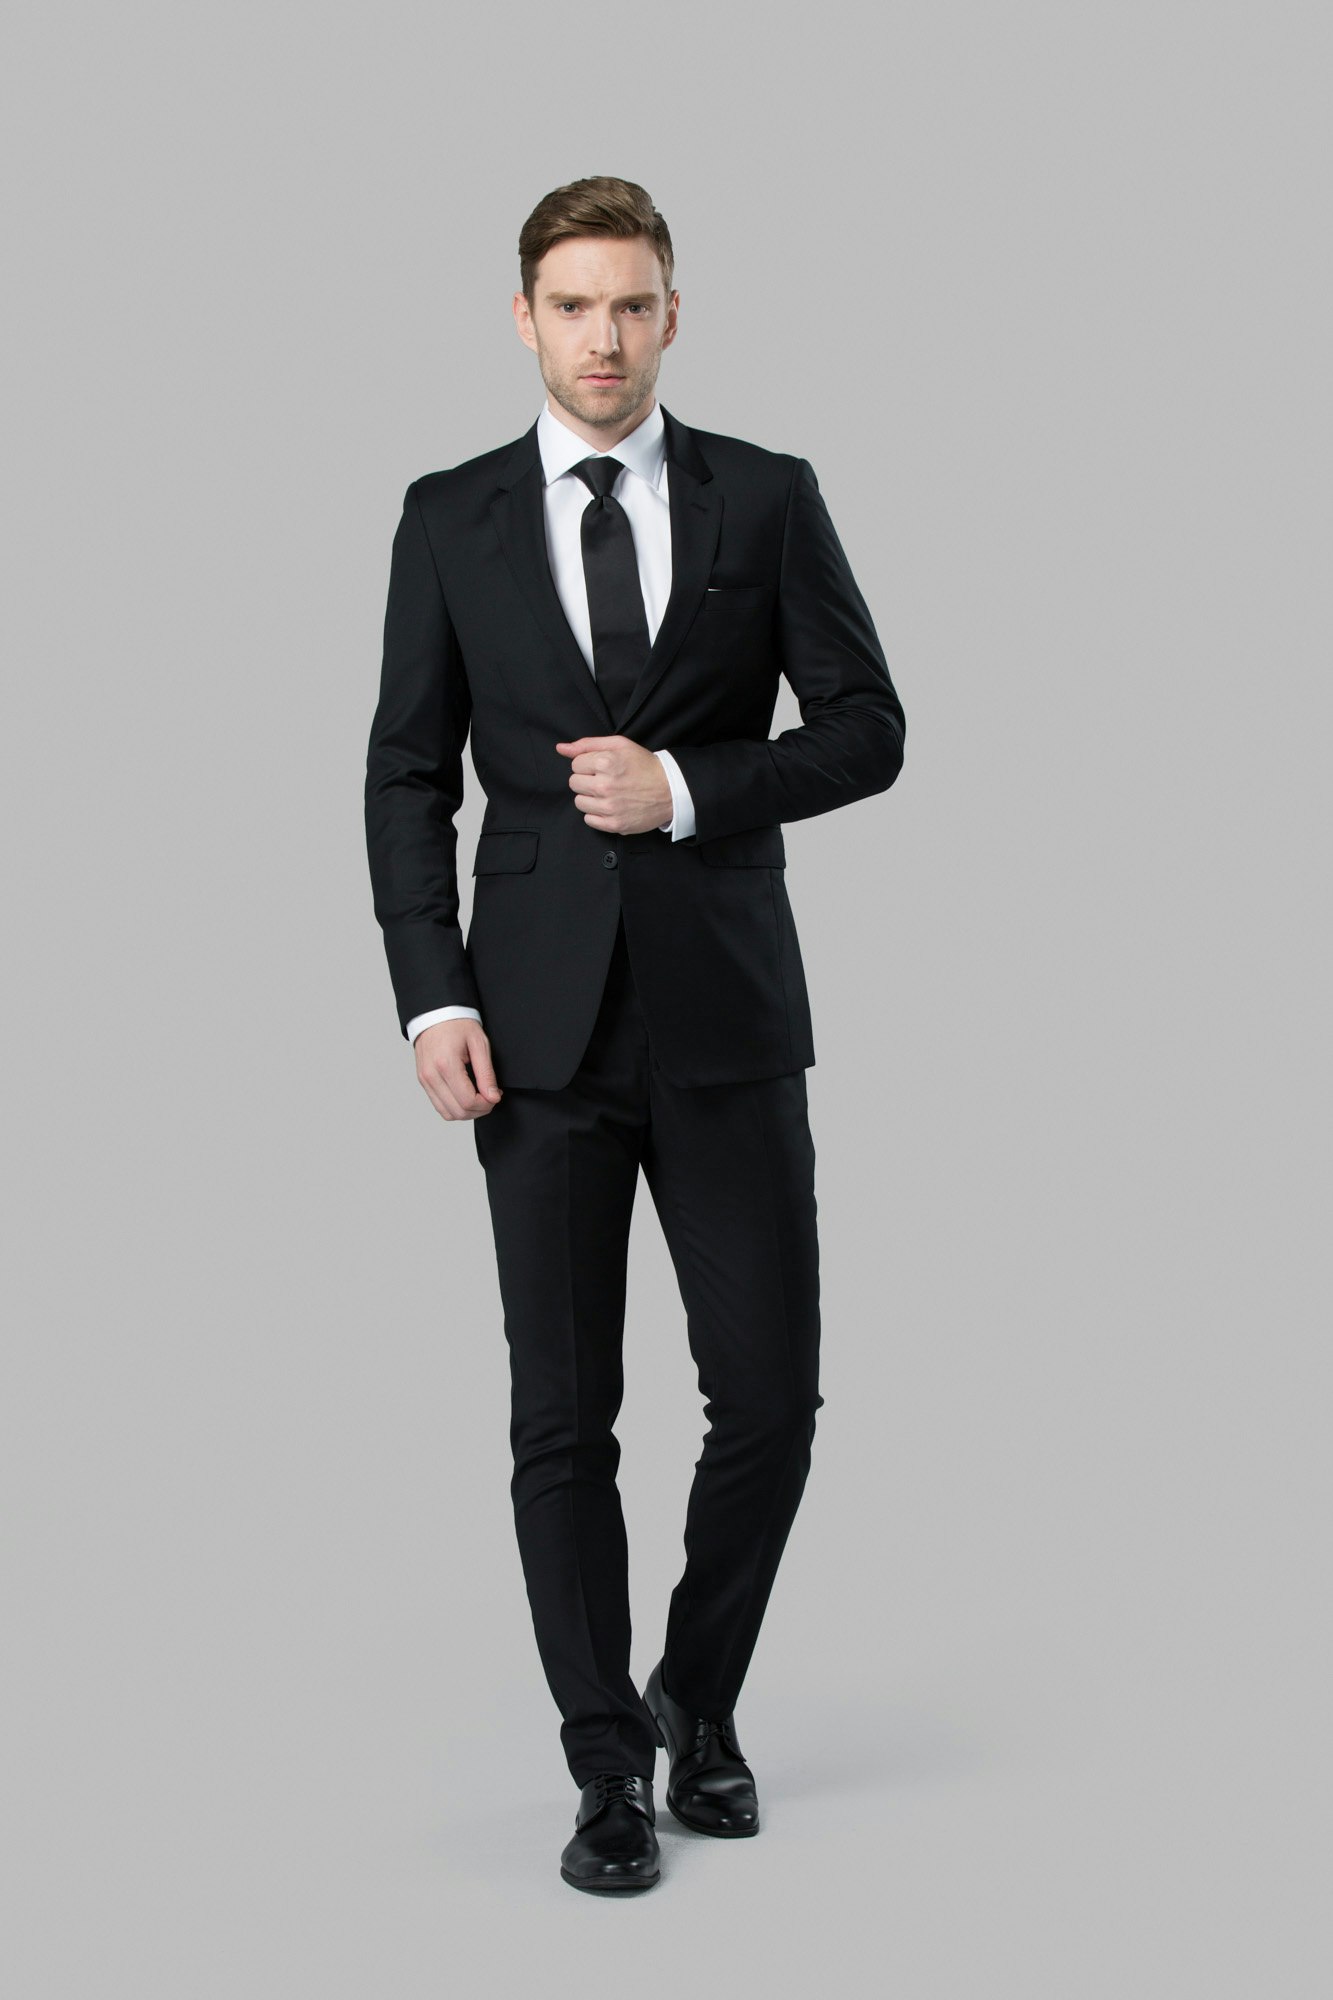 Styling suits for men black is an art form that requires attention to detail, creativity, and a keen understanding of sartorial principles.